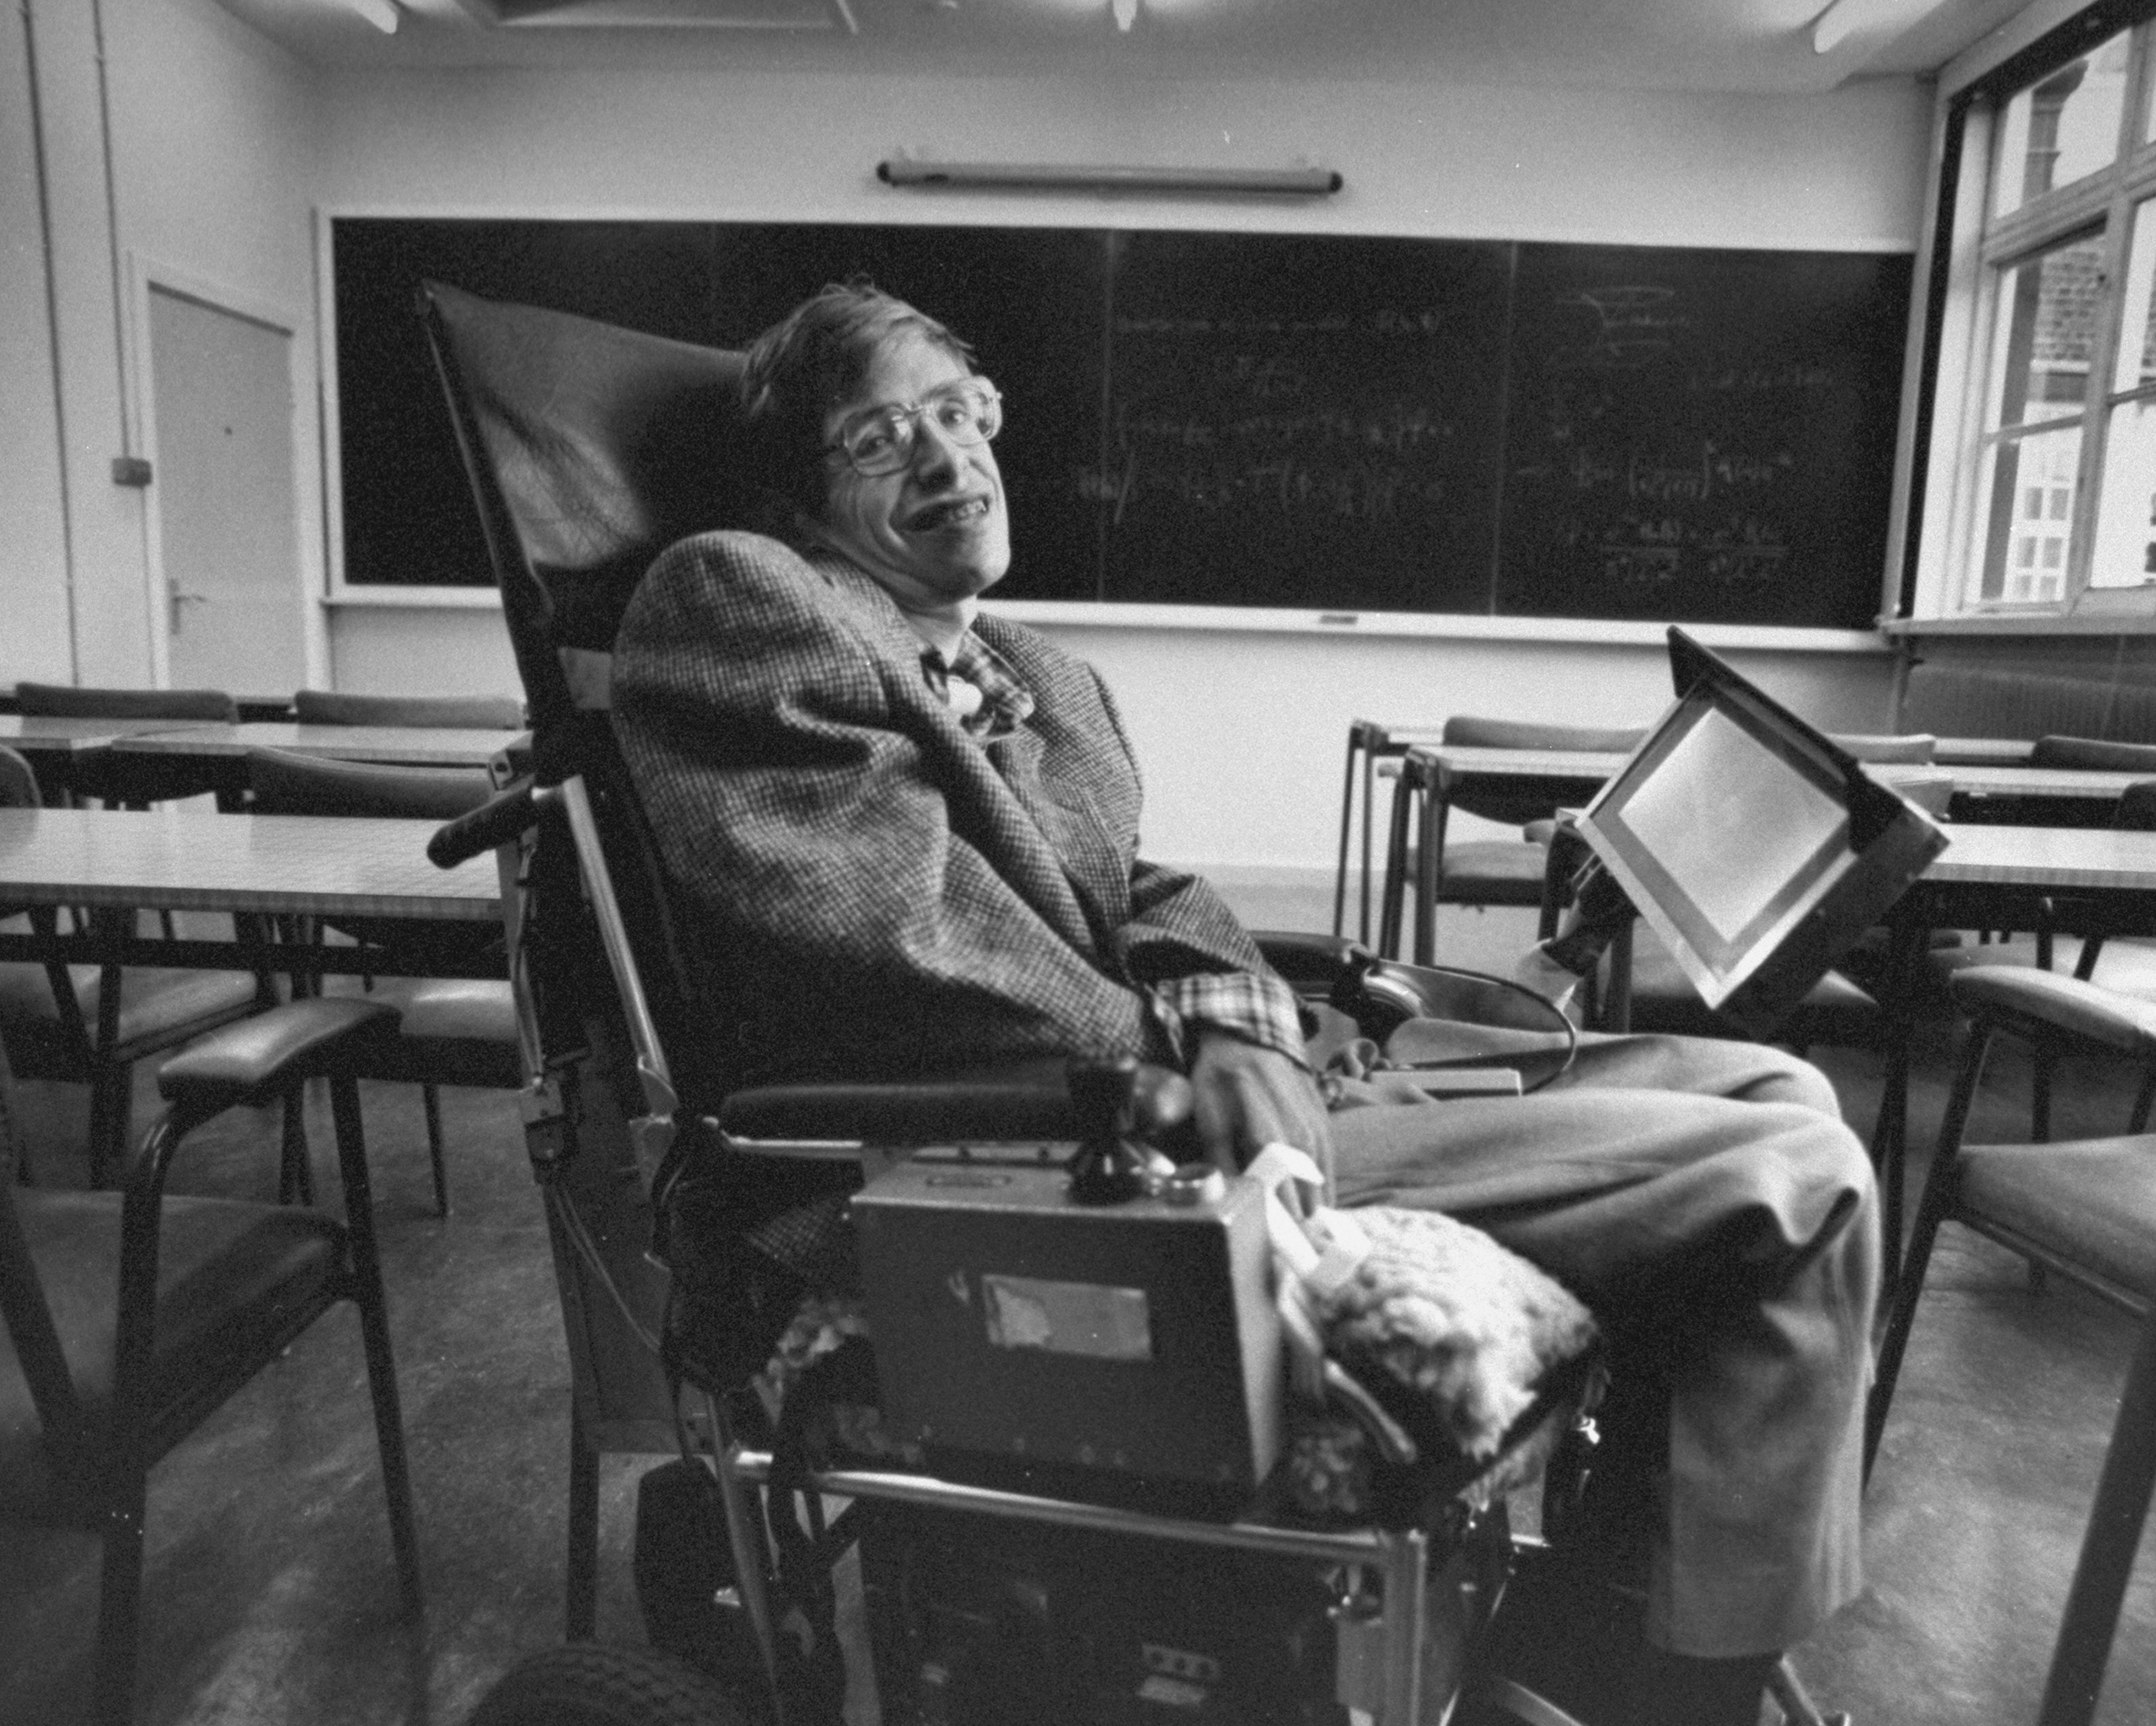 Physicist, author, and Cambridge University Professor Stephen Hawking, pictured in a lecture hall on Aug. 1, 1988. (Terry Smith—The LIFE Images Collection/Getty Images)